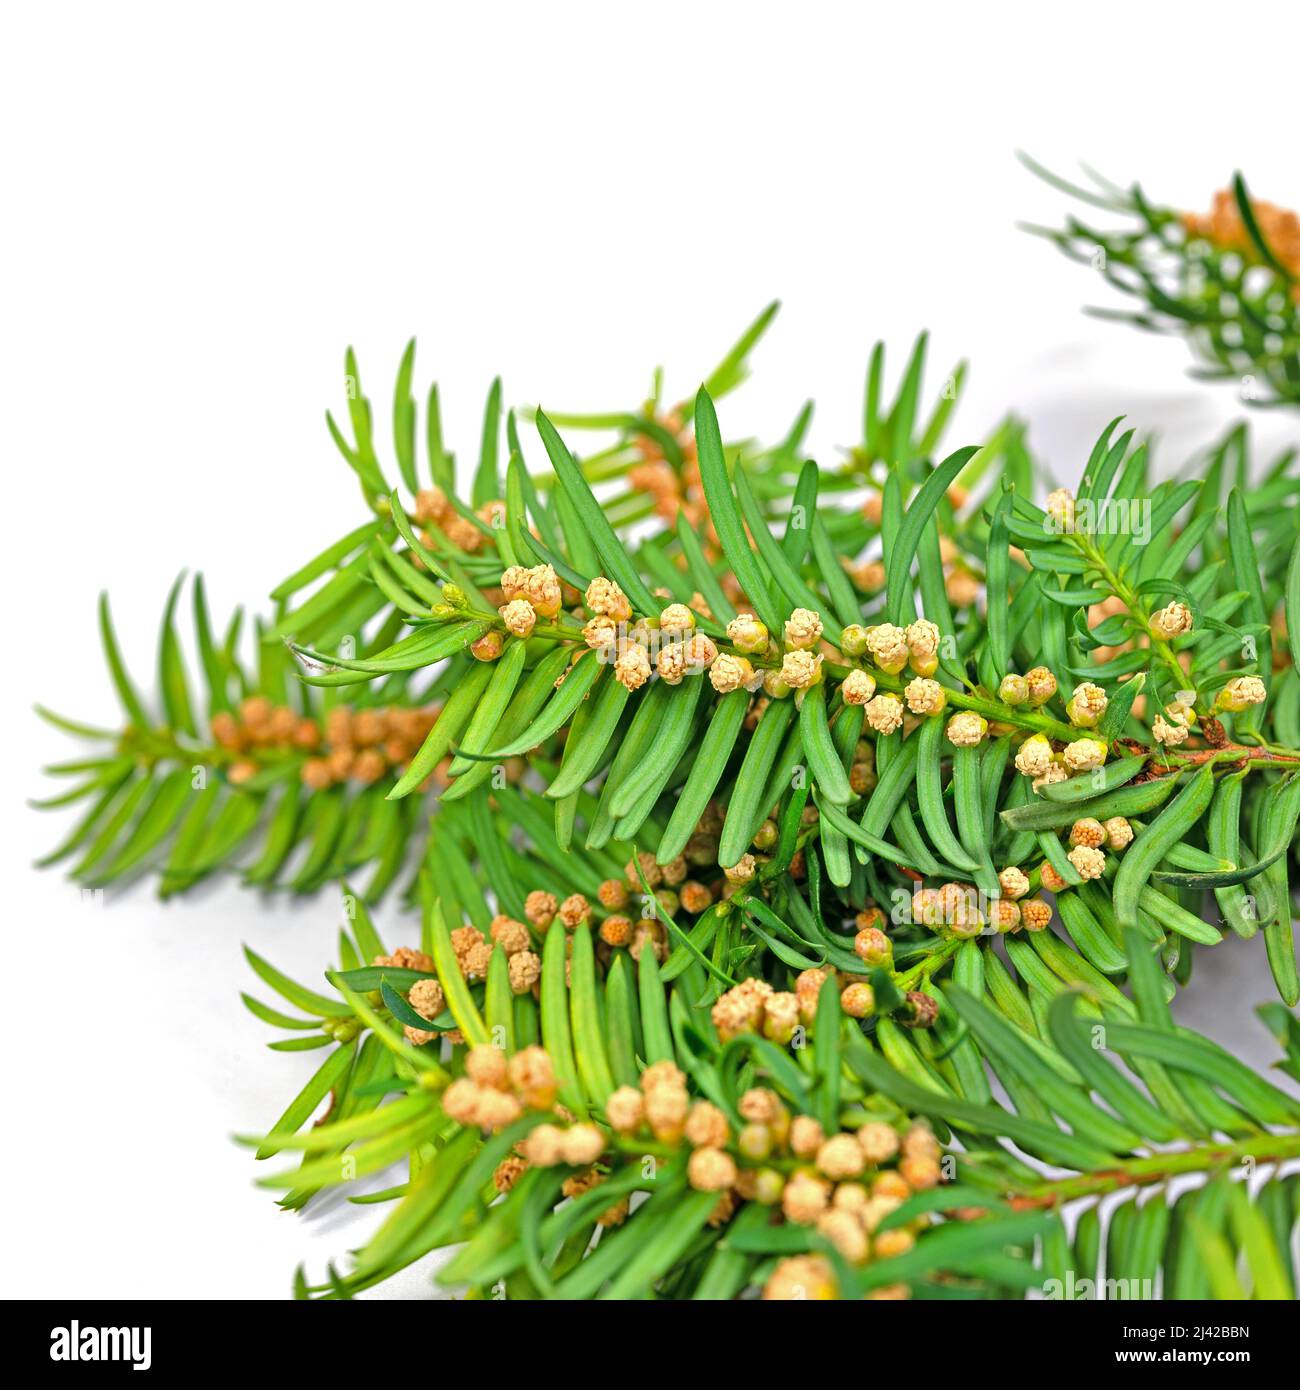 Female flowers of yew against white background Stock Photo